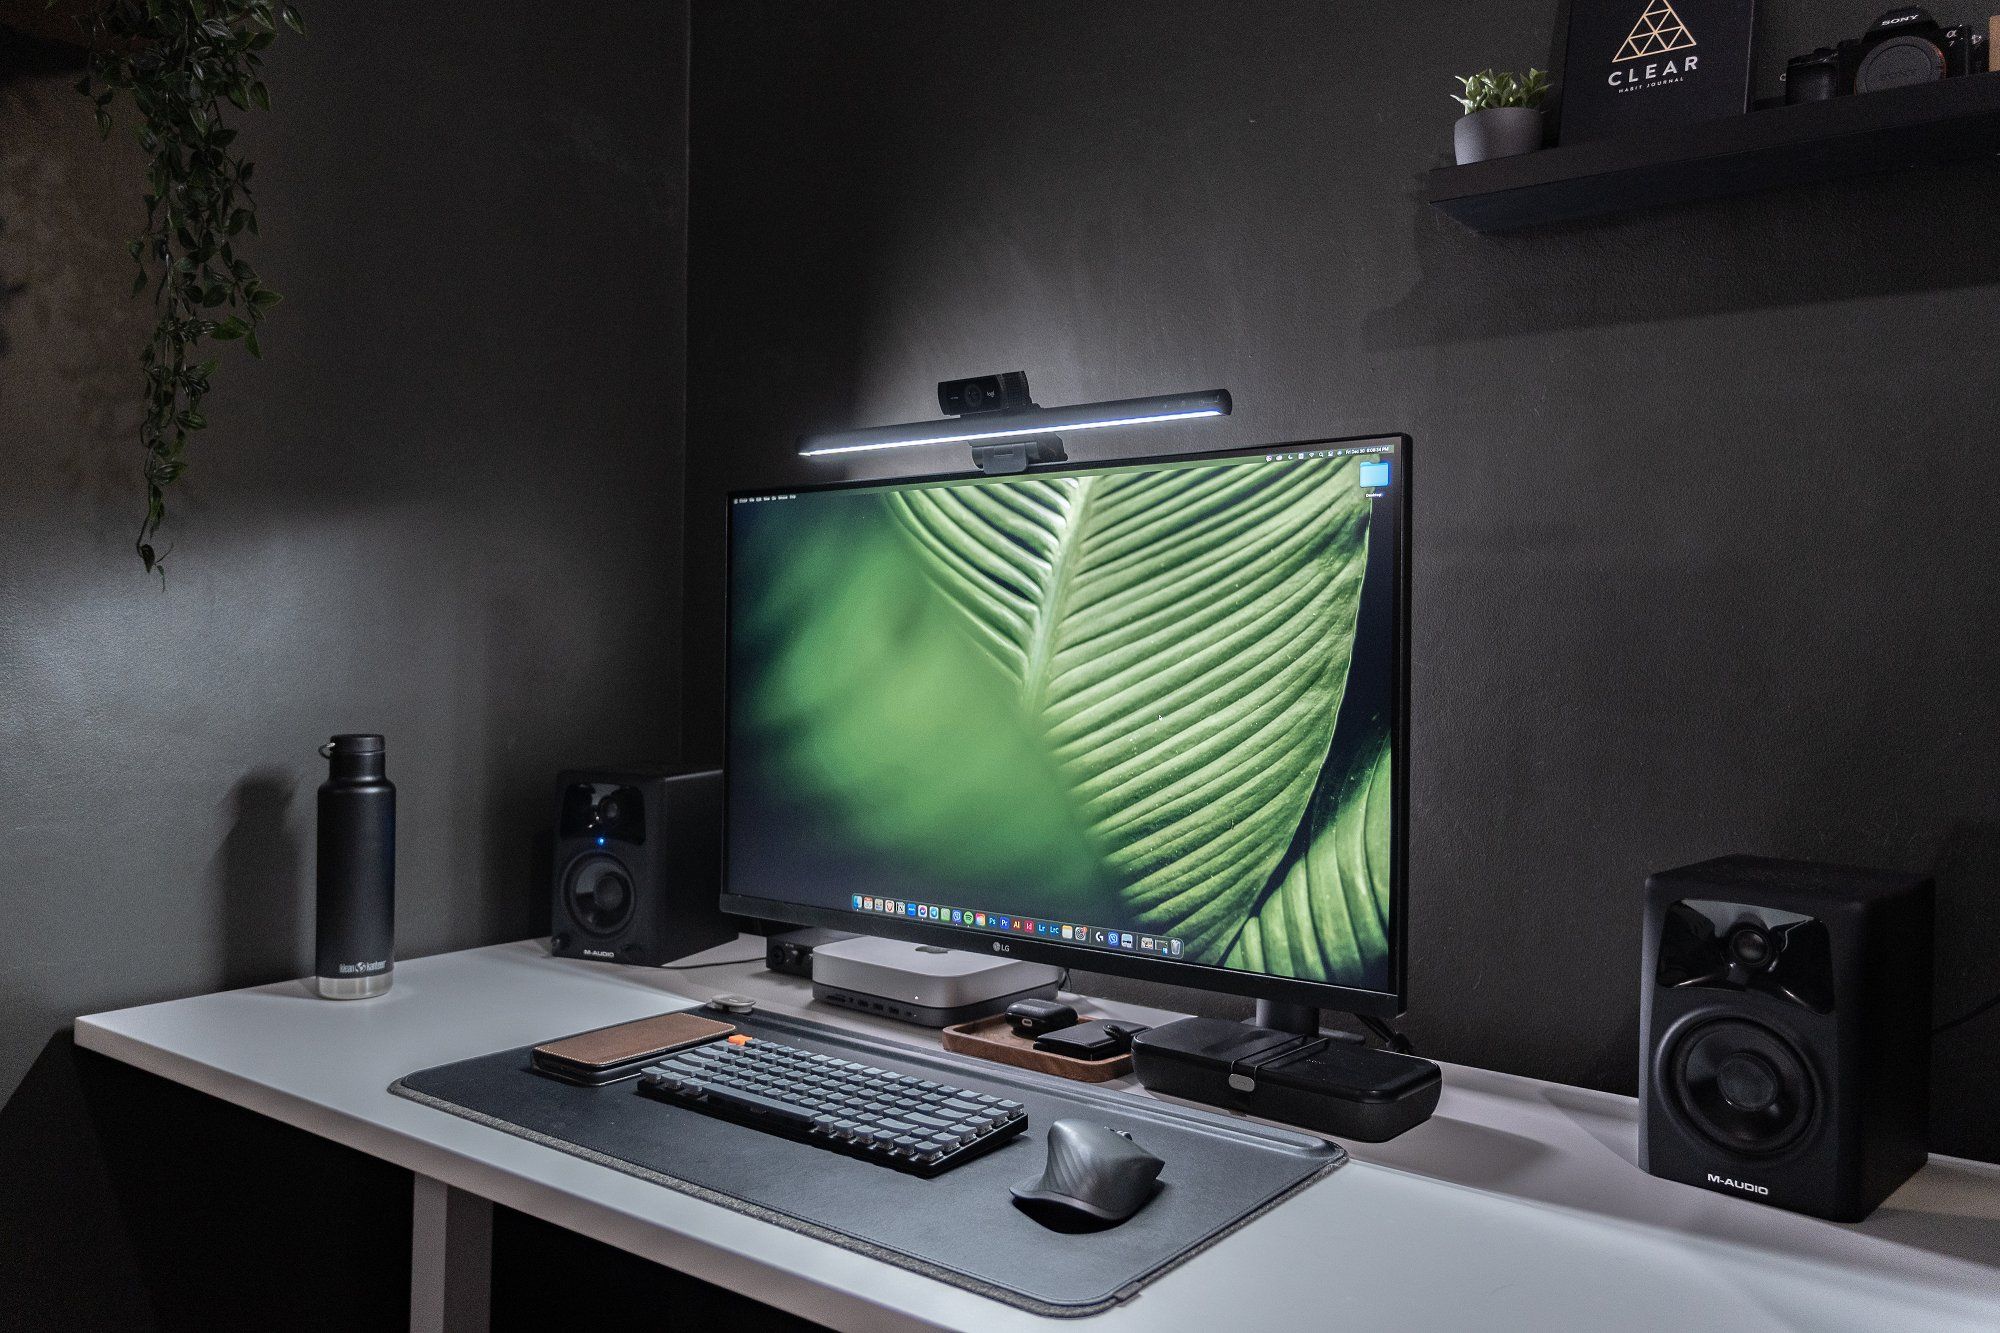 A black and white minimal desk setup fully equipped for work-from-home